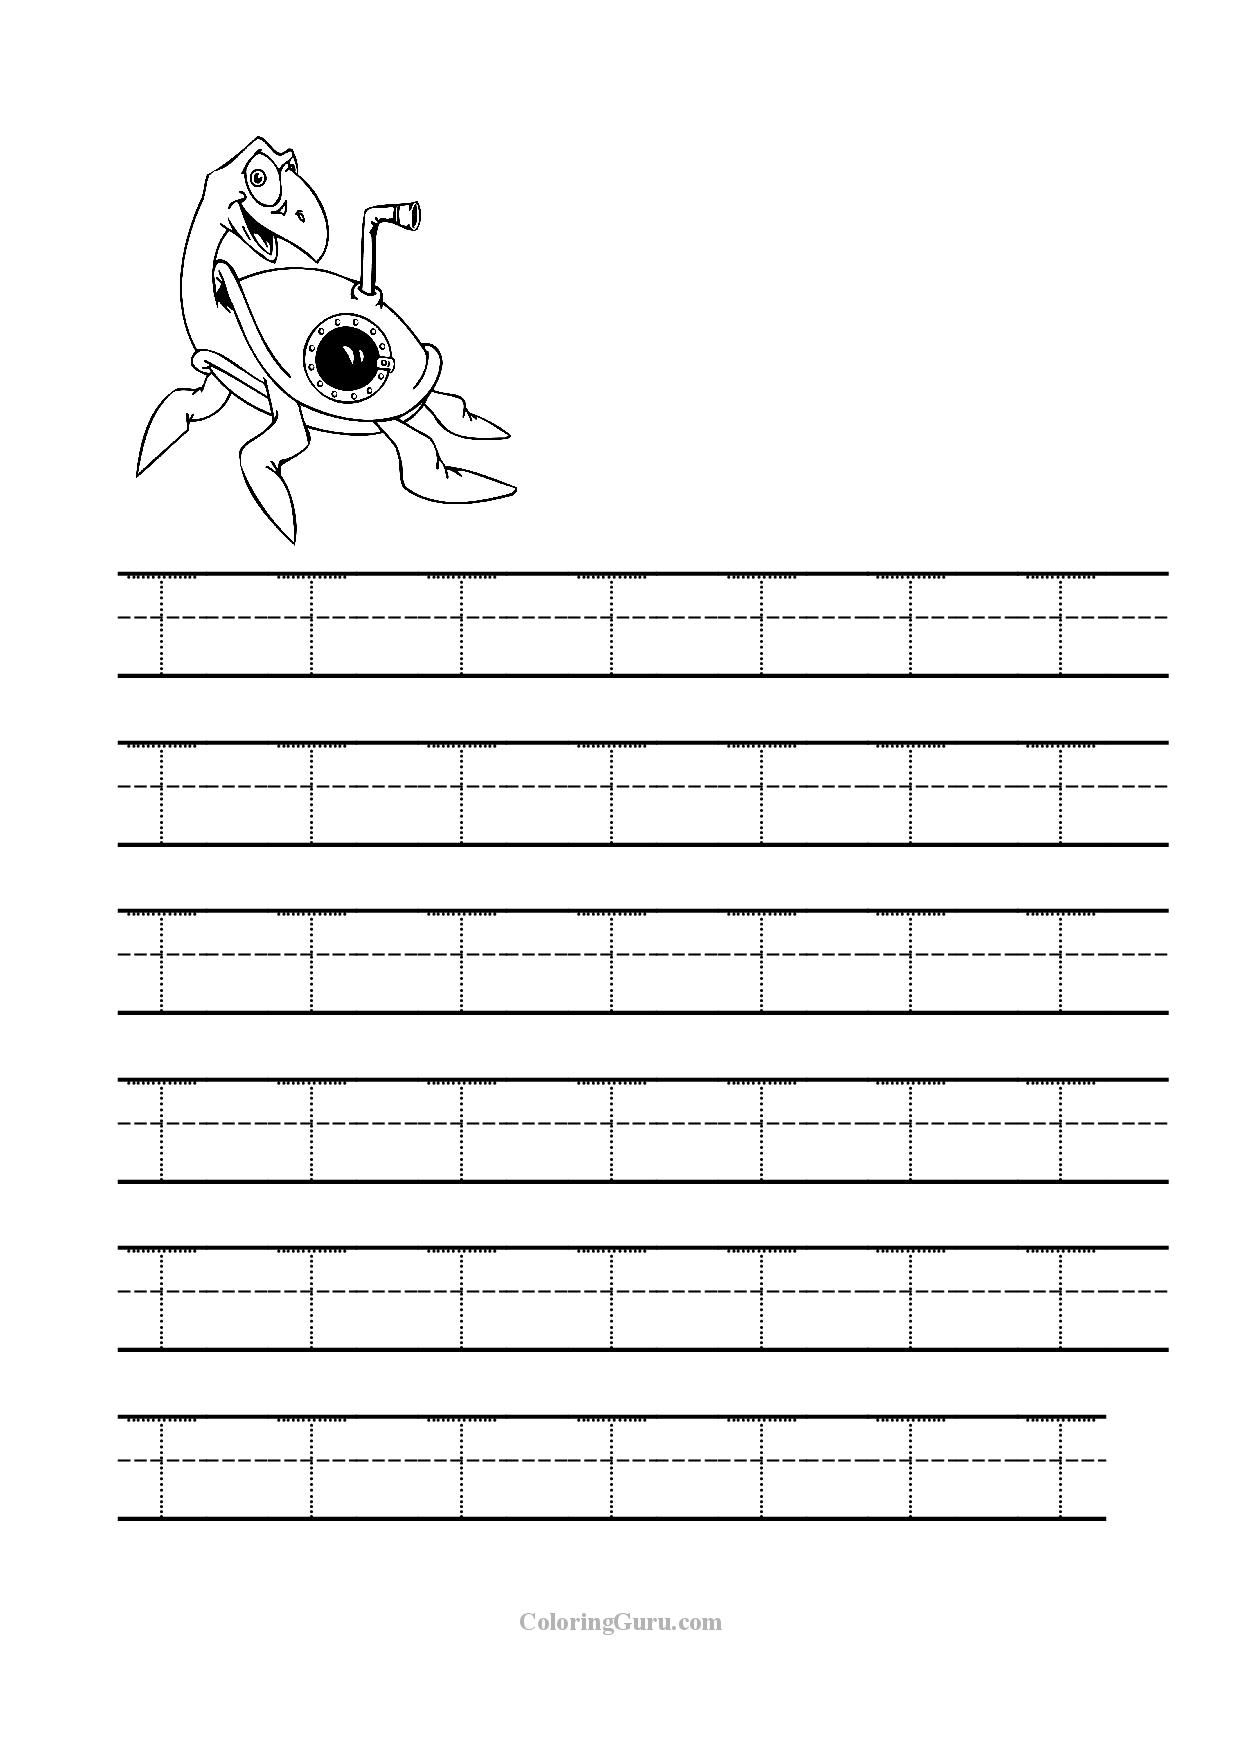 Free Printable Tracing Letter T Worksheets For Preschool in Tracing The Letter I Worksheets For Preschool